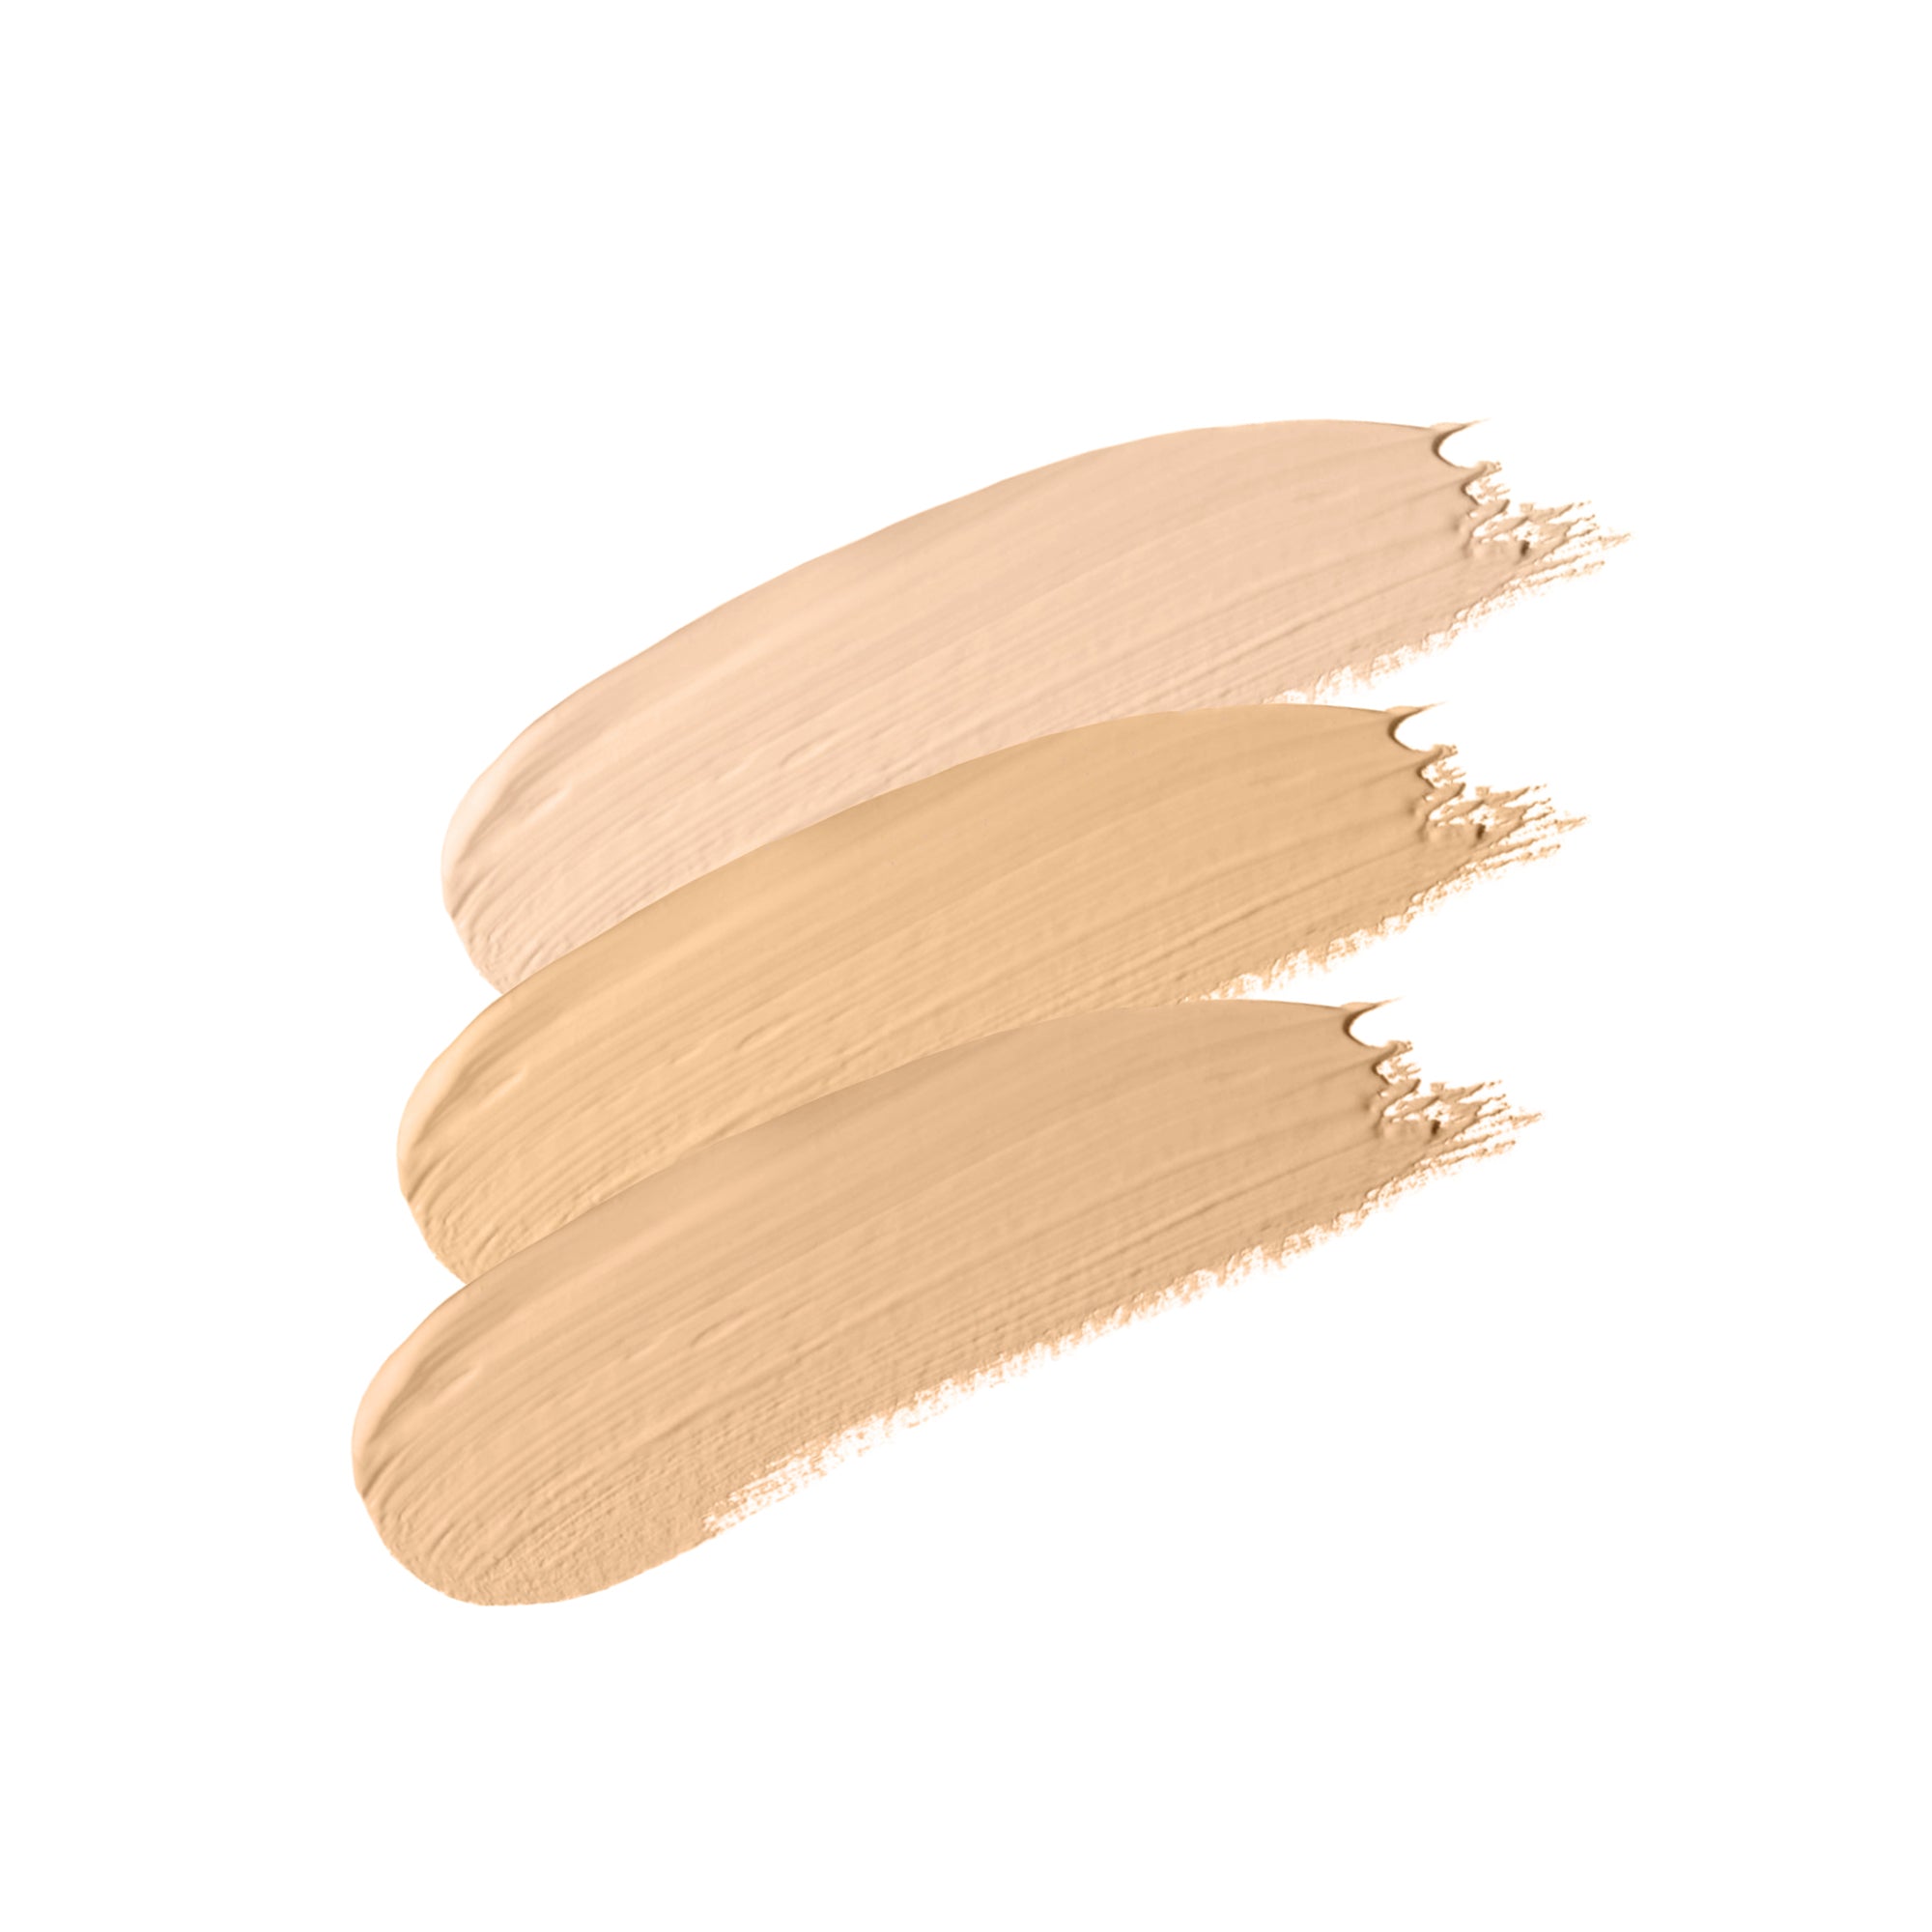 2 - WARM PINK - buildable, creamy, hydrating concealer in warm pink undertone shade two in group shot